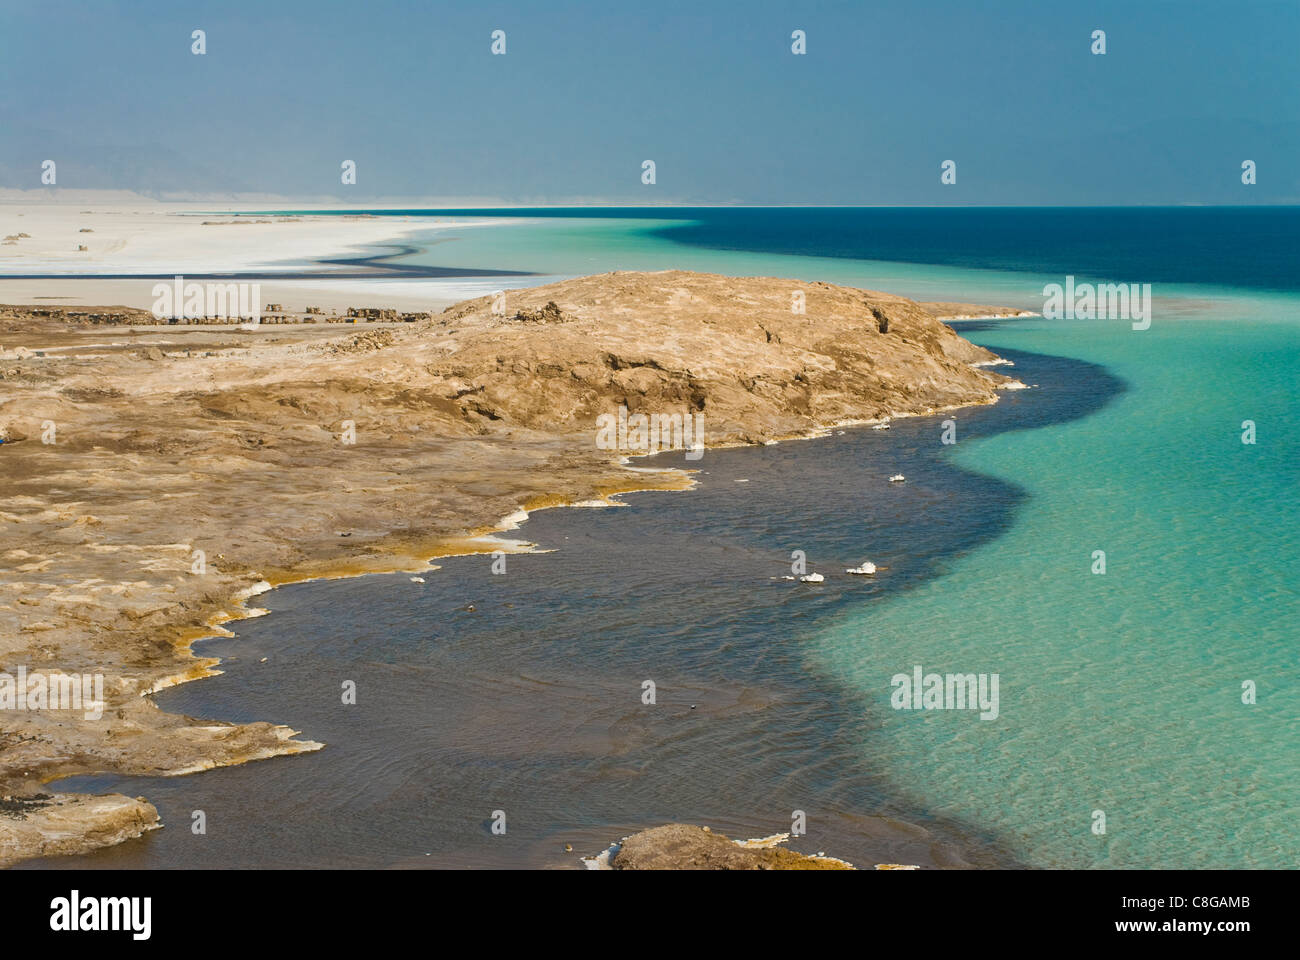 Lake Assal crater lake in the central Djibouti with its salt pans, Afar Depression, Djibouti Stock Photo